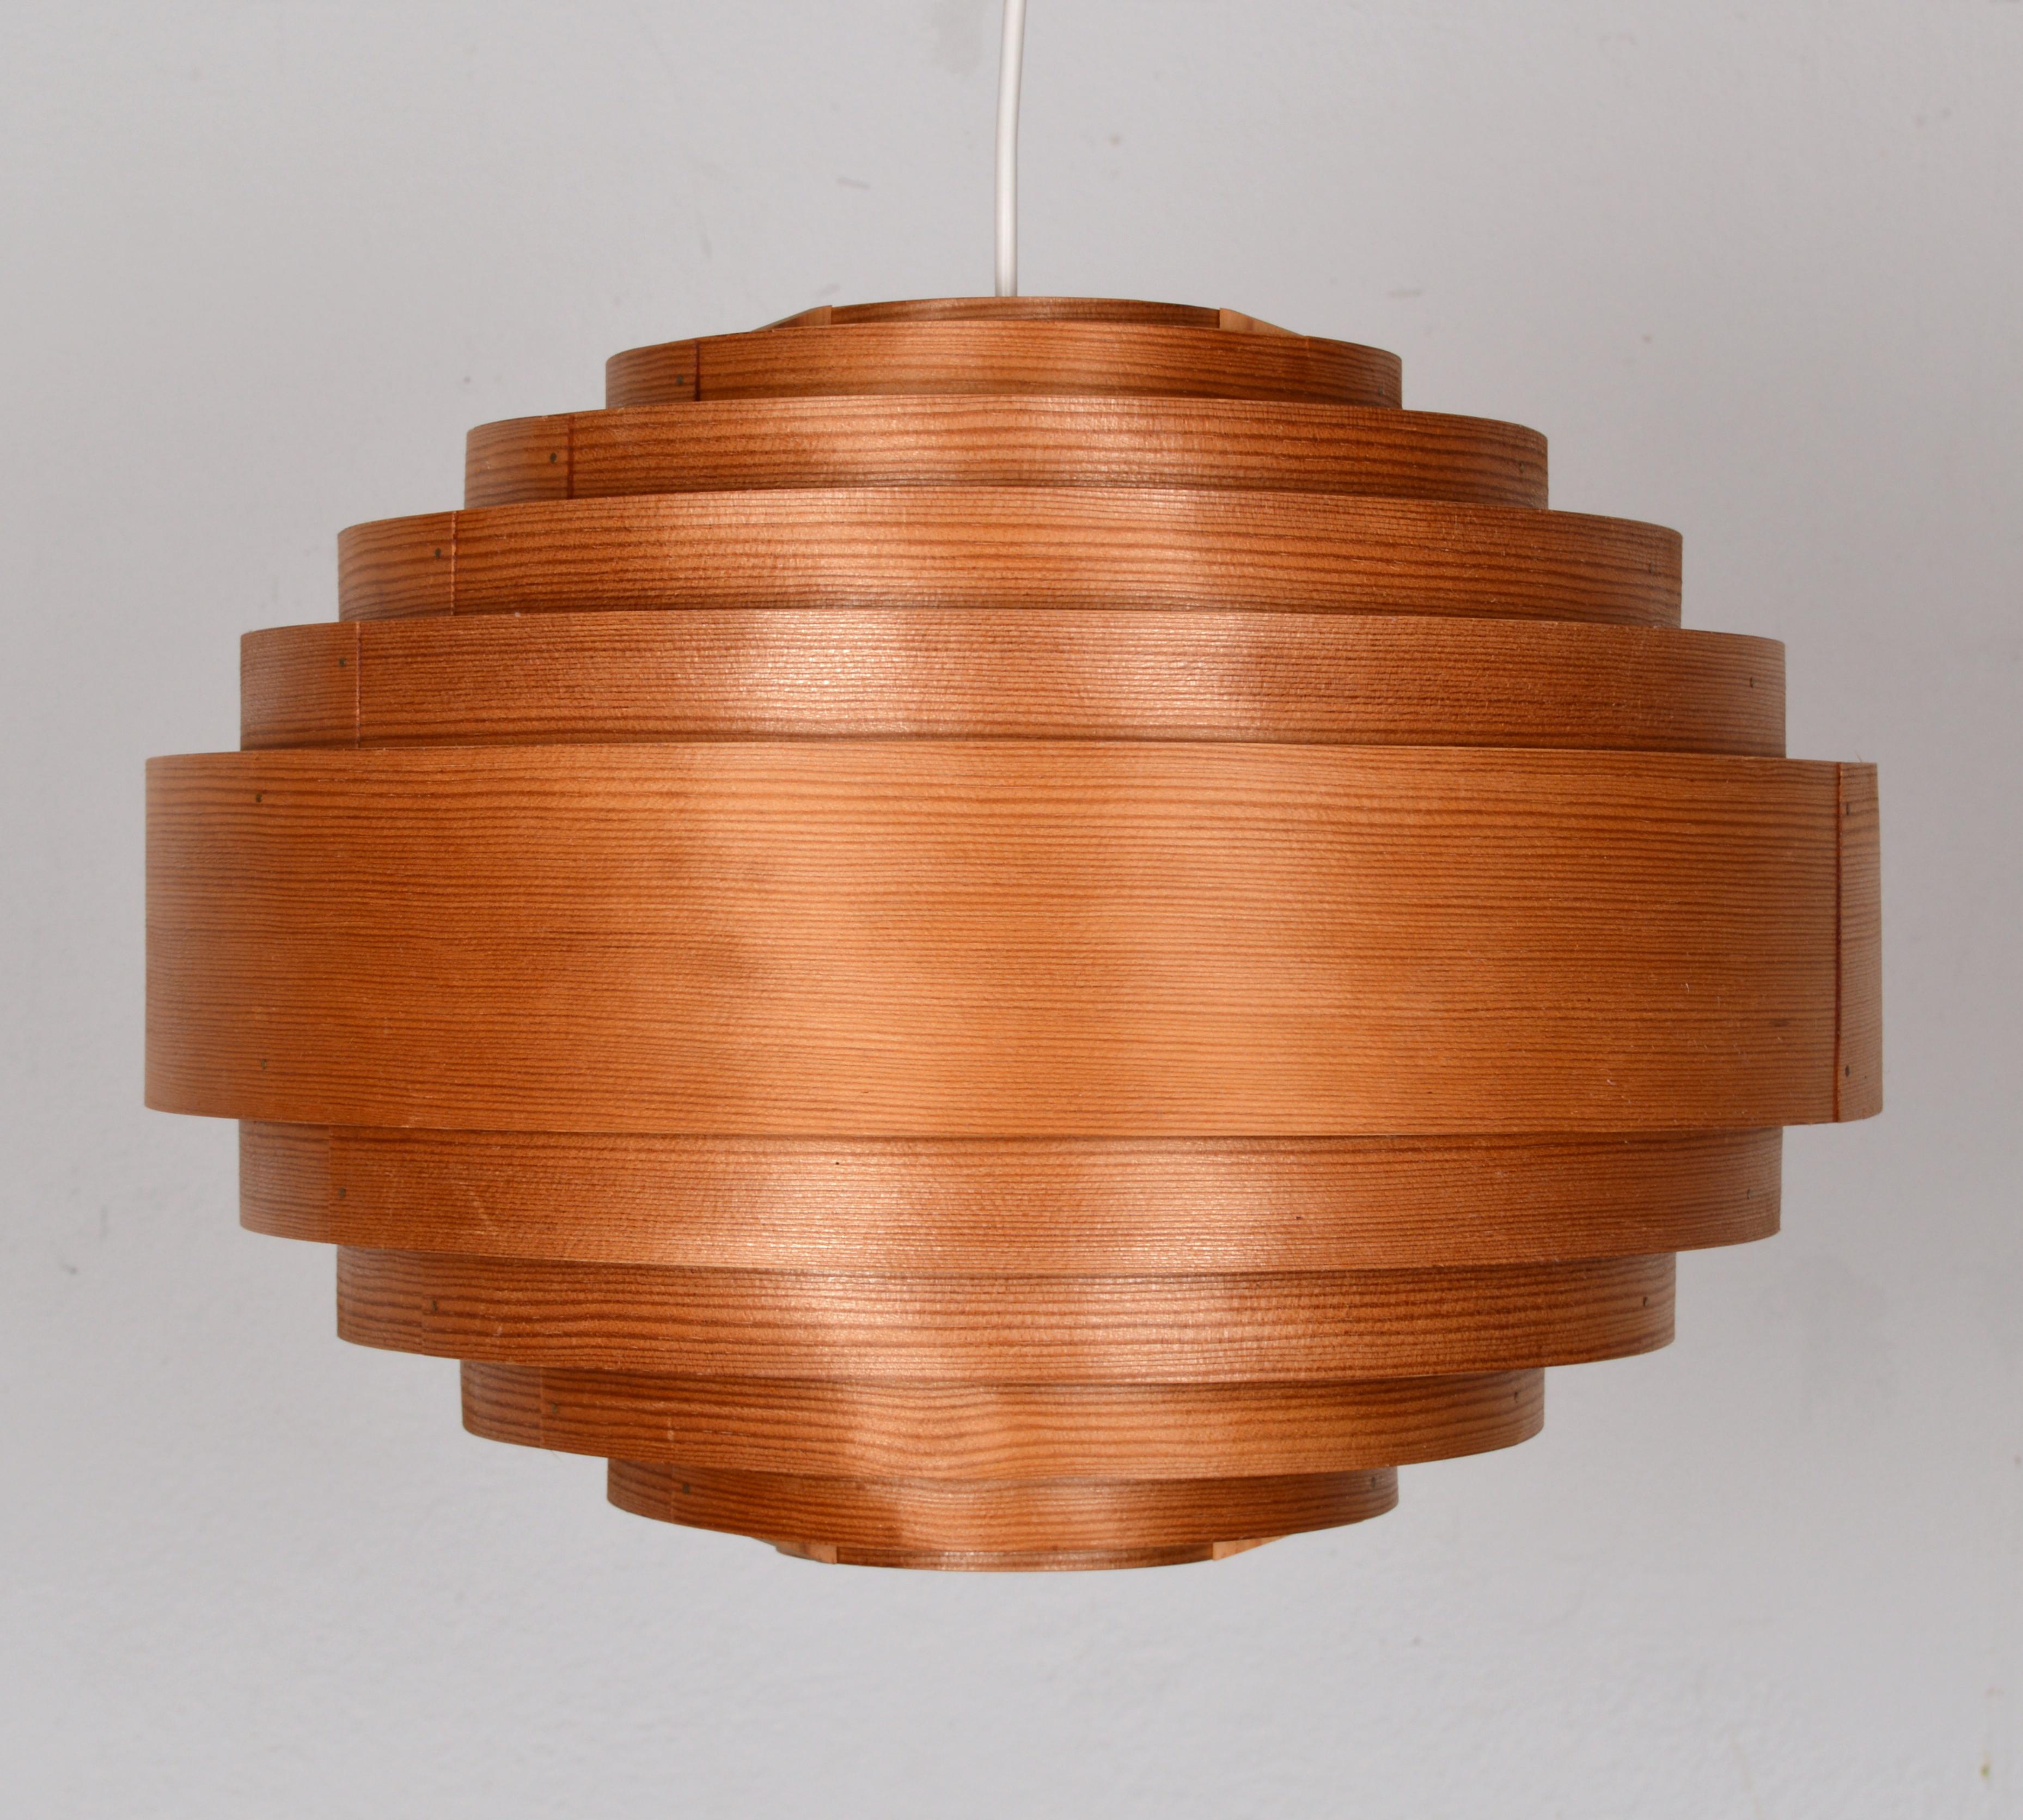 Large 1960s Hans-Agne Jakobsson for Ellysett Pine Chandelier. This is a rare chandelier designed by Hans Agne Jakobsson for Ellysett. This piece is made of pine veneer in a stepped spherical design. This piece has a natural, warm glow when